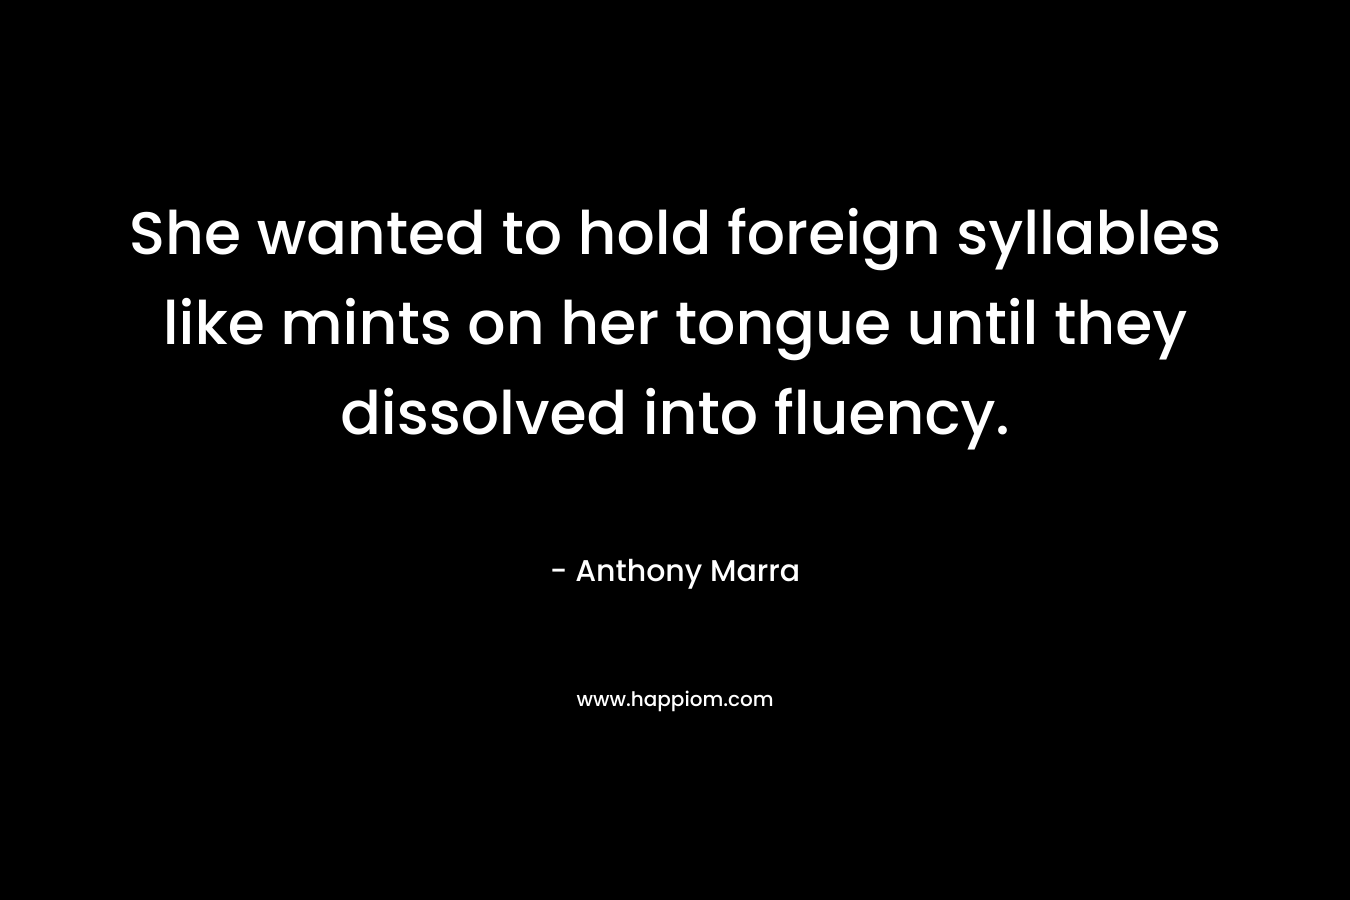 She wanted to hold foreign syllables like mints on her tongue until they dissolved into fluency. – Anthony Marra